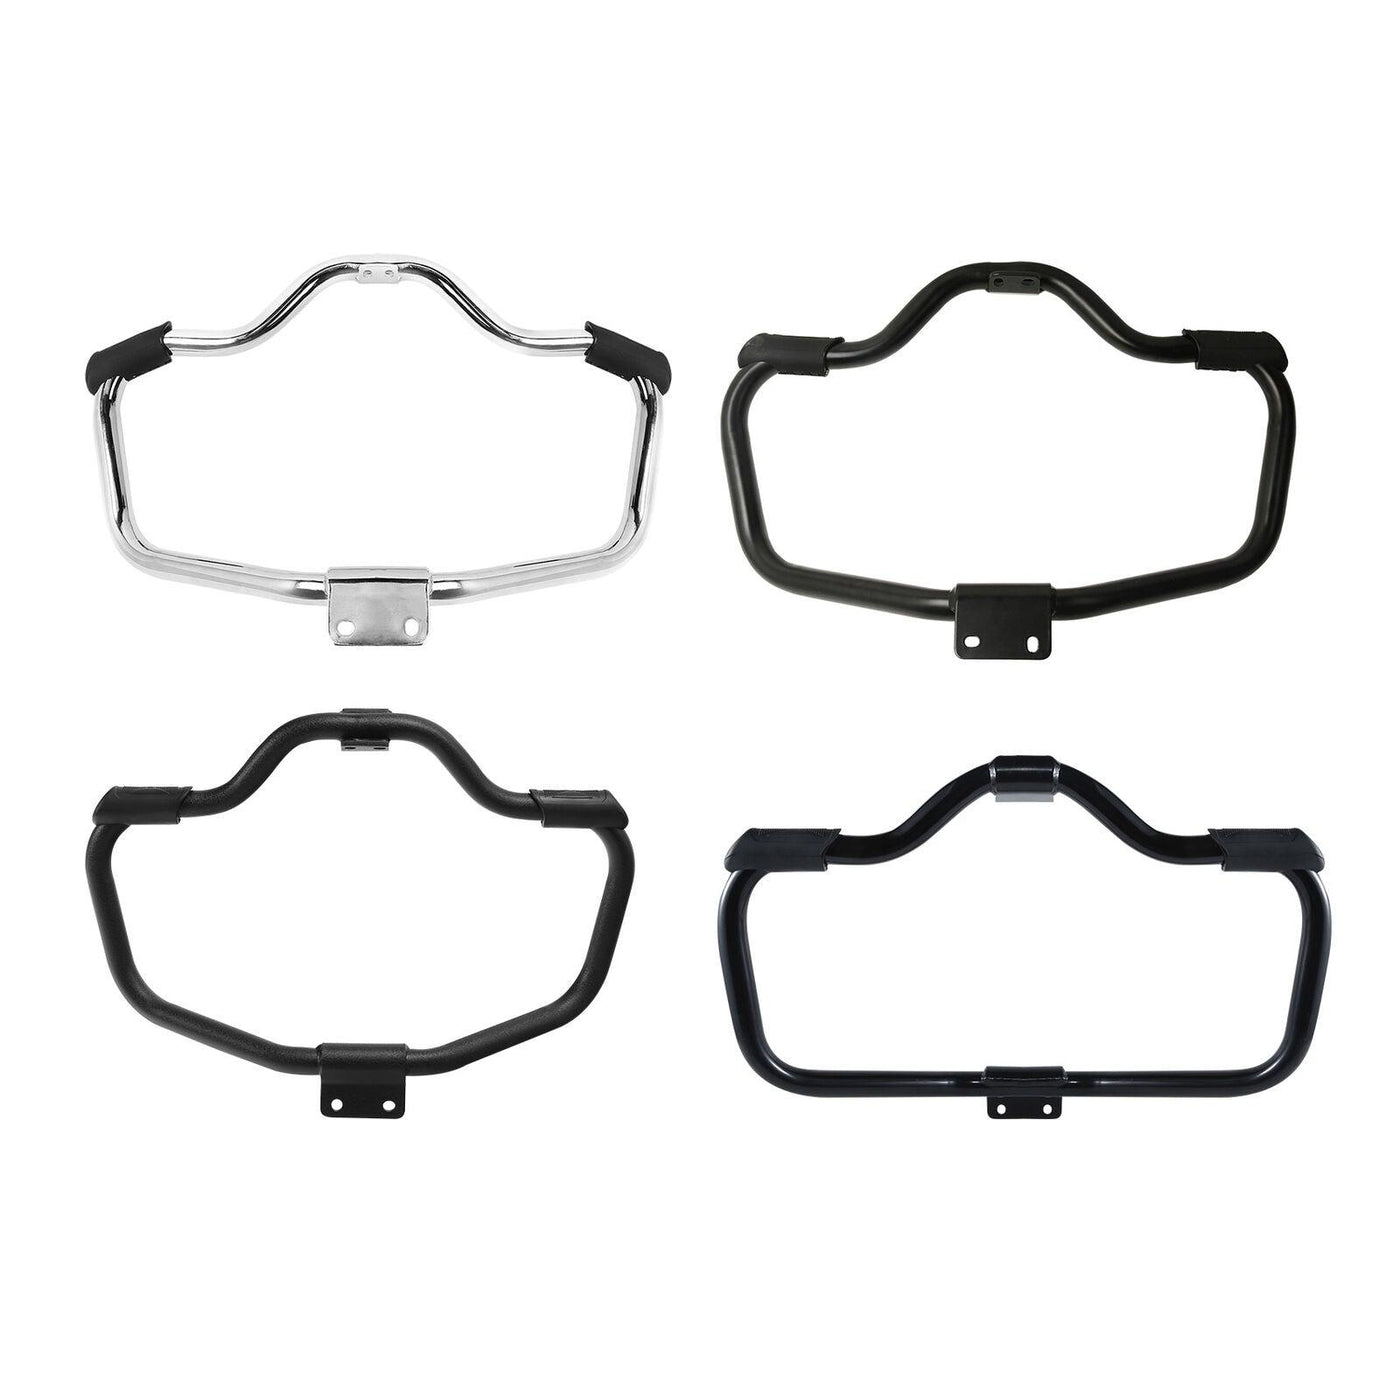 Mustache Engine Guard Crash Bar Fit For Harley Sportster 883 1200 Custom 2004-UP - Moto Life Products